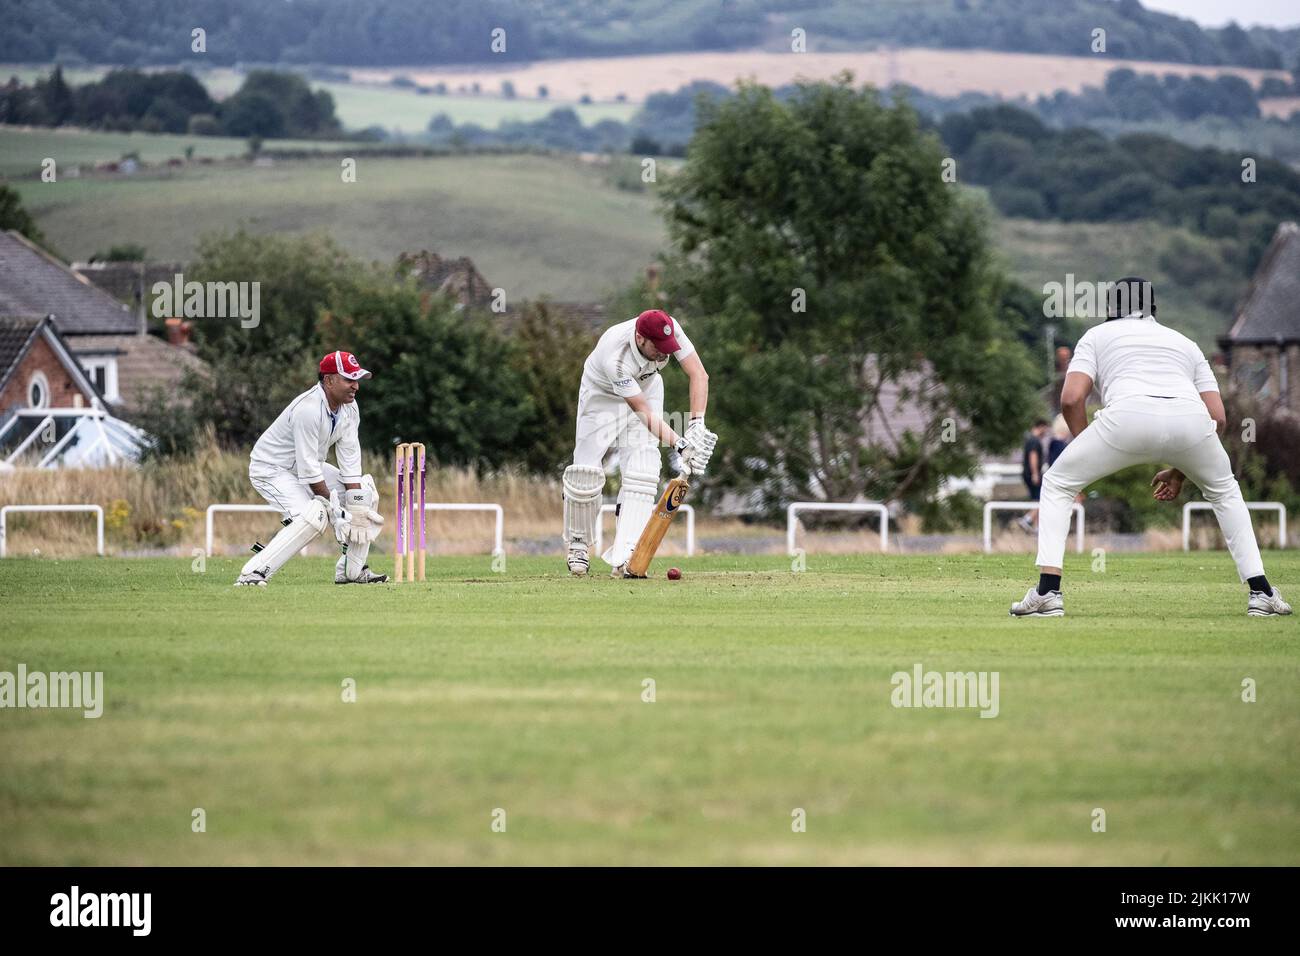 Cricket Batsman playing defensive shot watched by a wicket keeper and fielder during a weekend local village cricket match in Huddersfield, Yorkshire Stock Photo